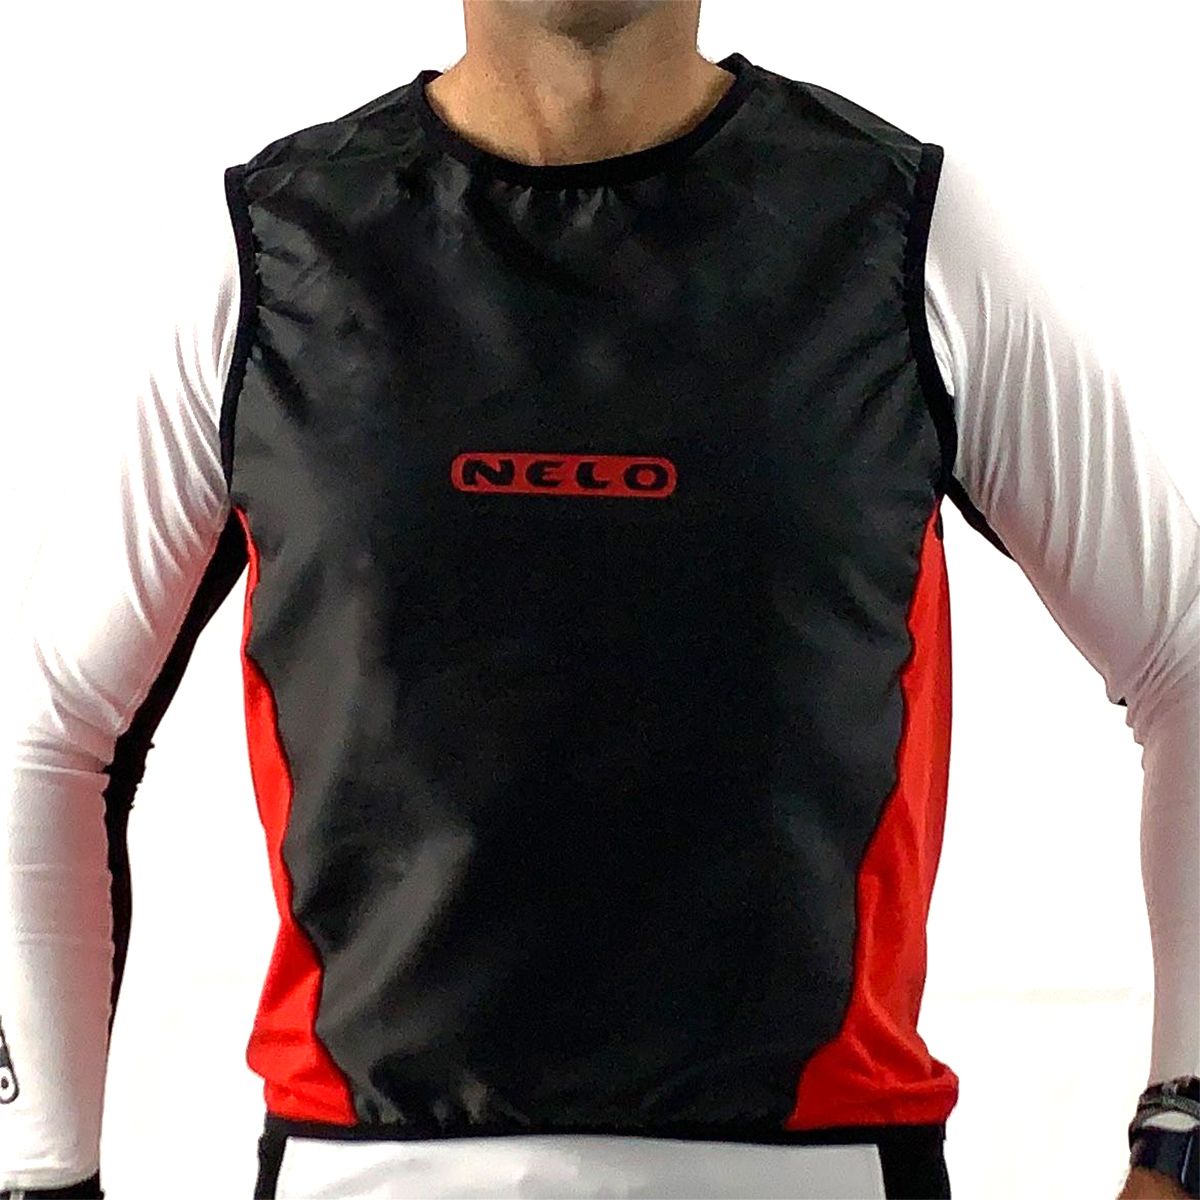 Nelo Wind vest for racing kayak - red, front